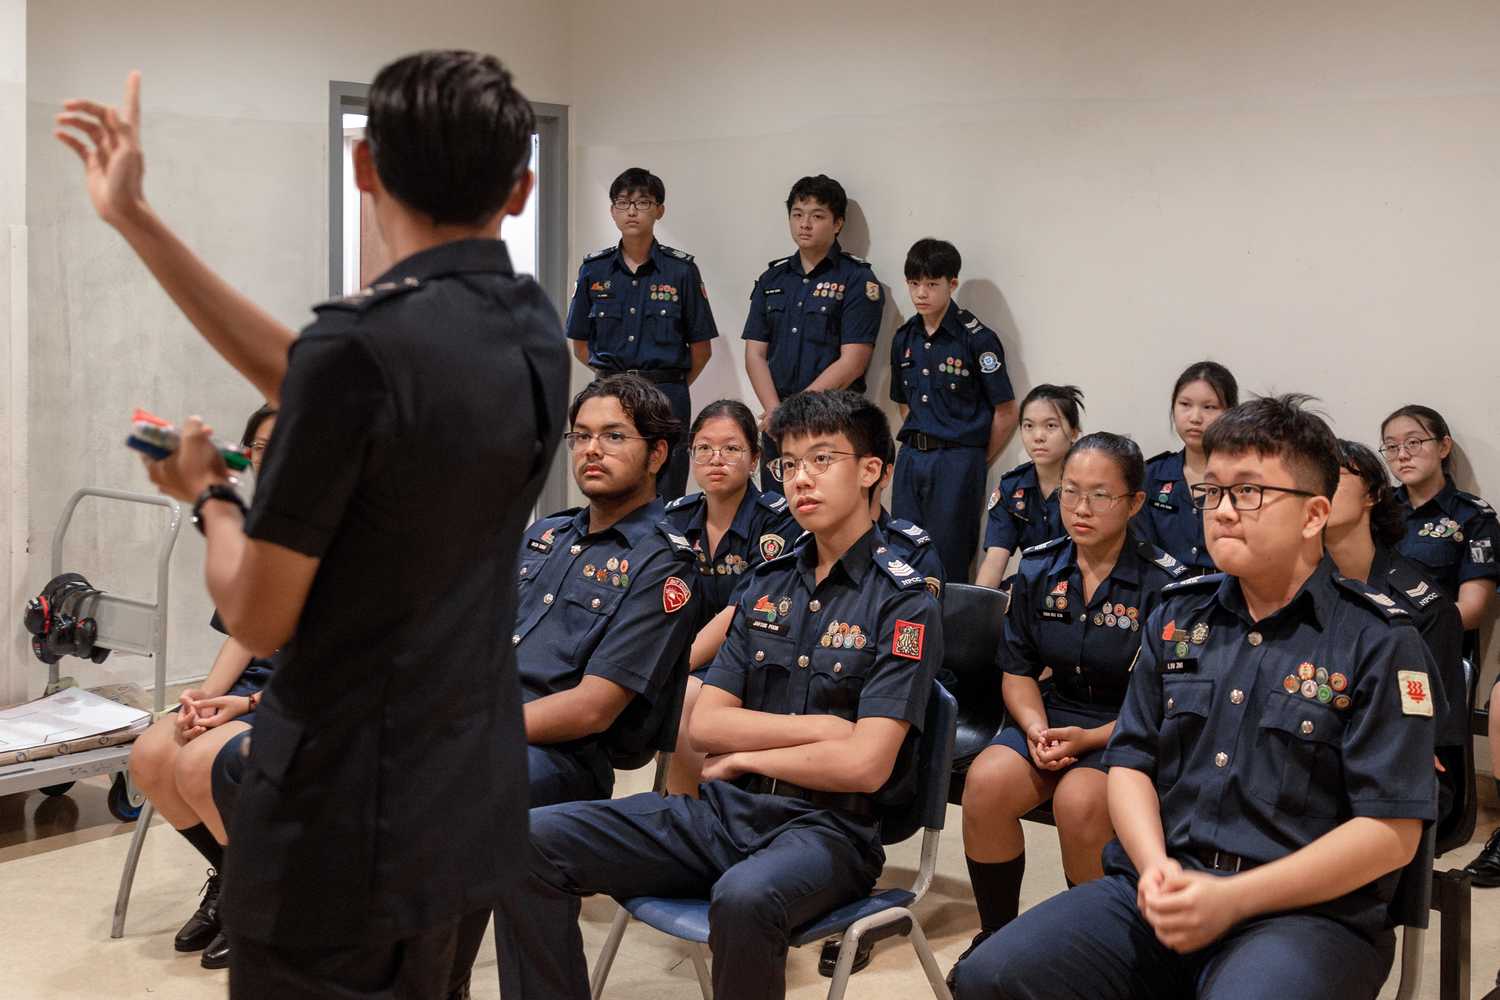 Cadet Inspector explaining instructions to NPCC Cadets, Cadets are listening intently. 